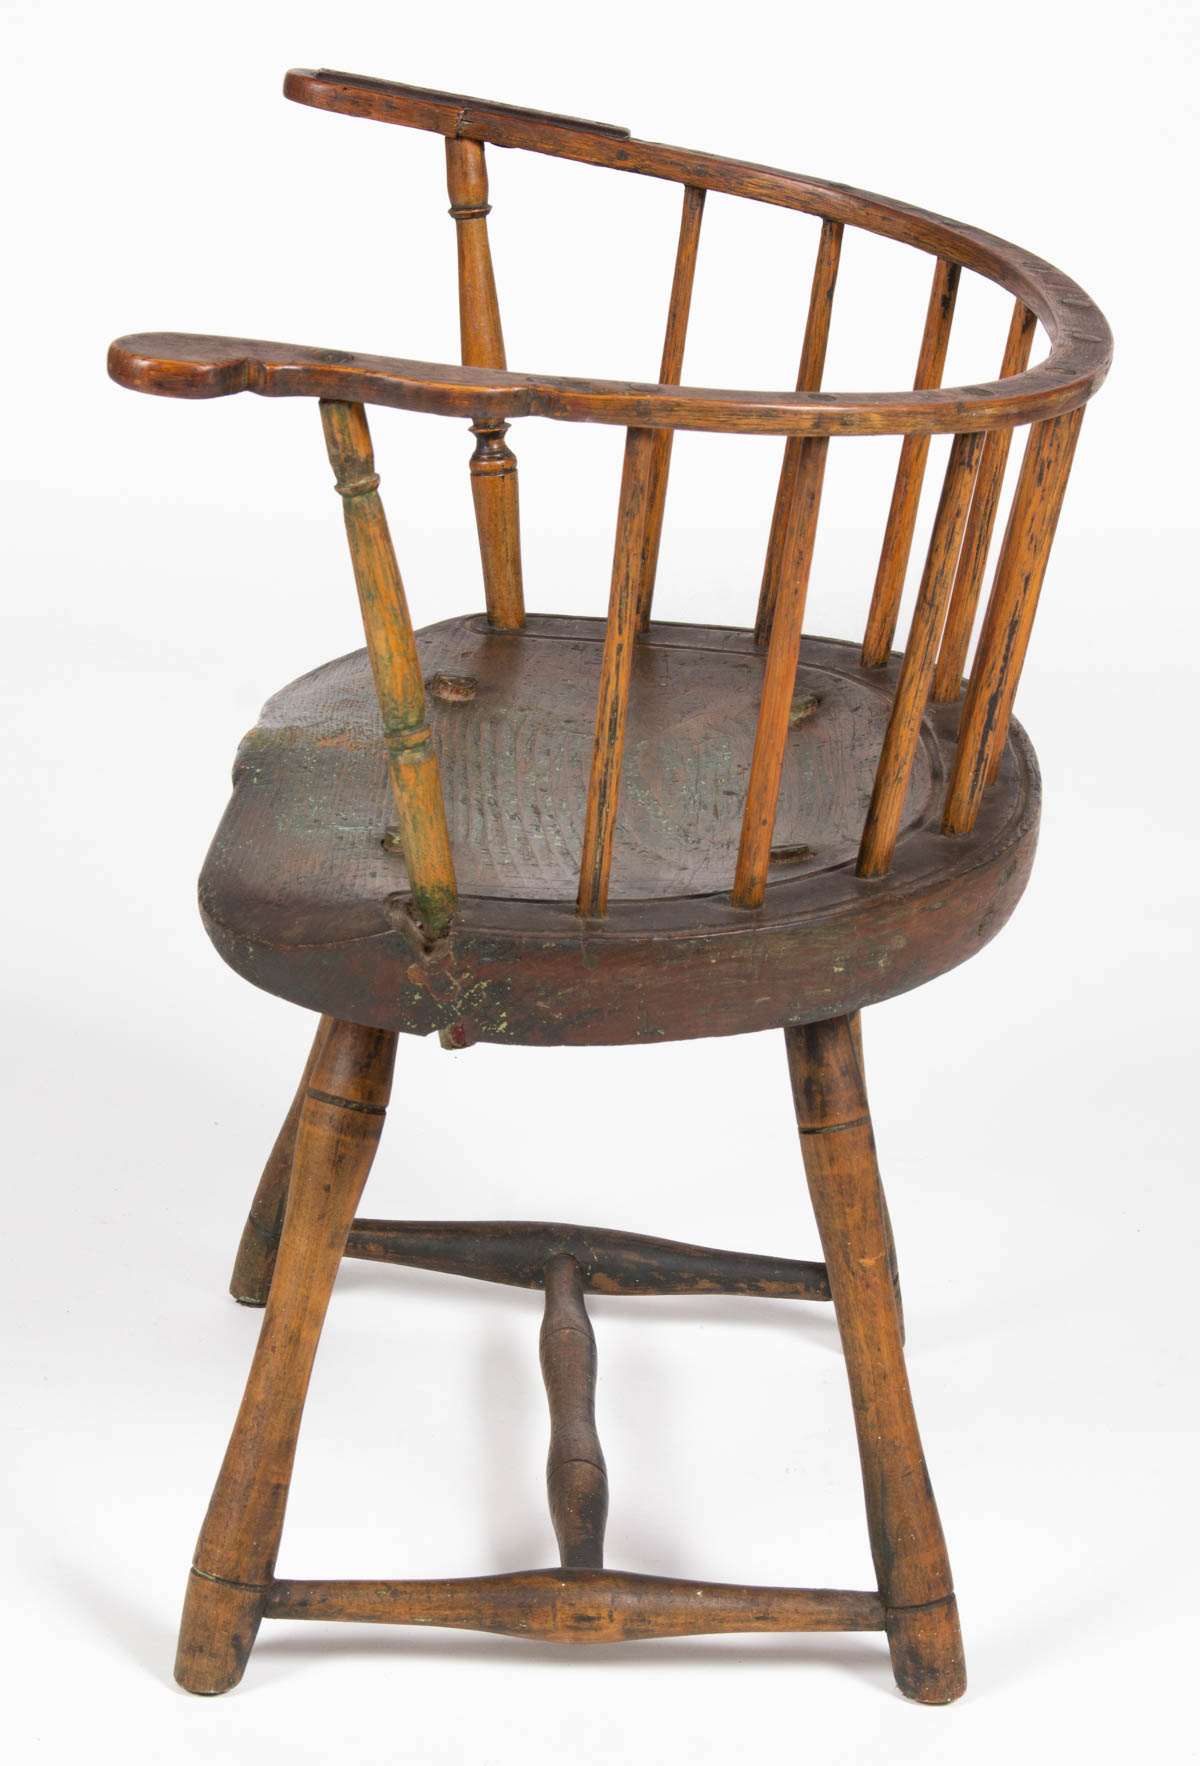 AMERICAN PAINTED WINDSOR LOW-BACK CHAIR